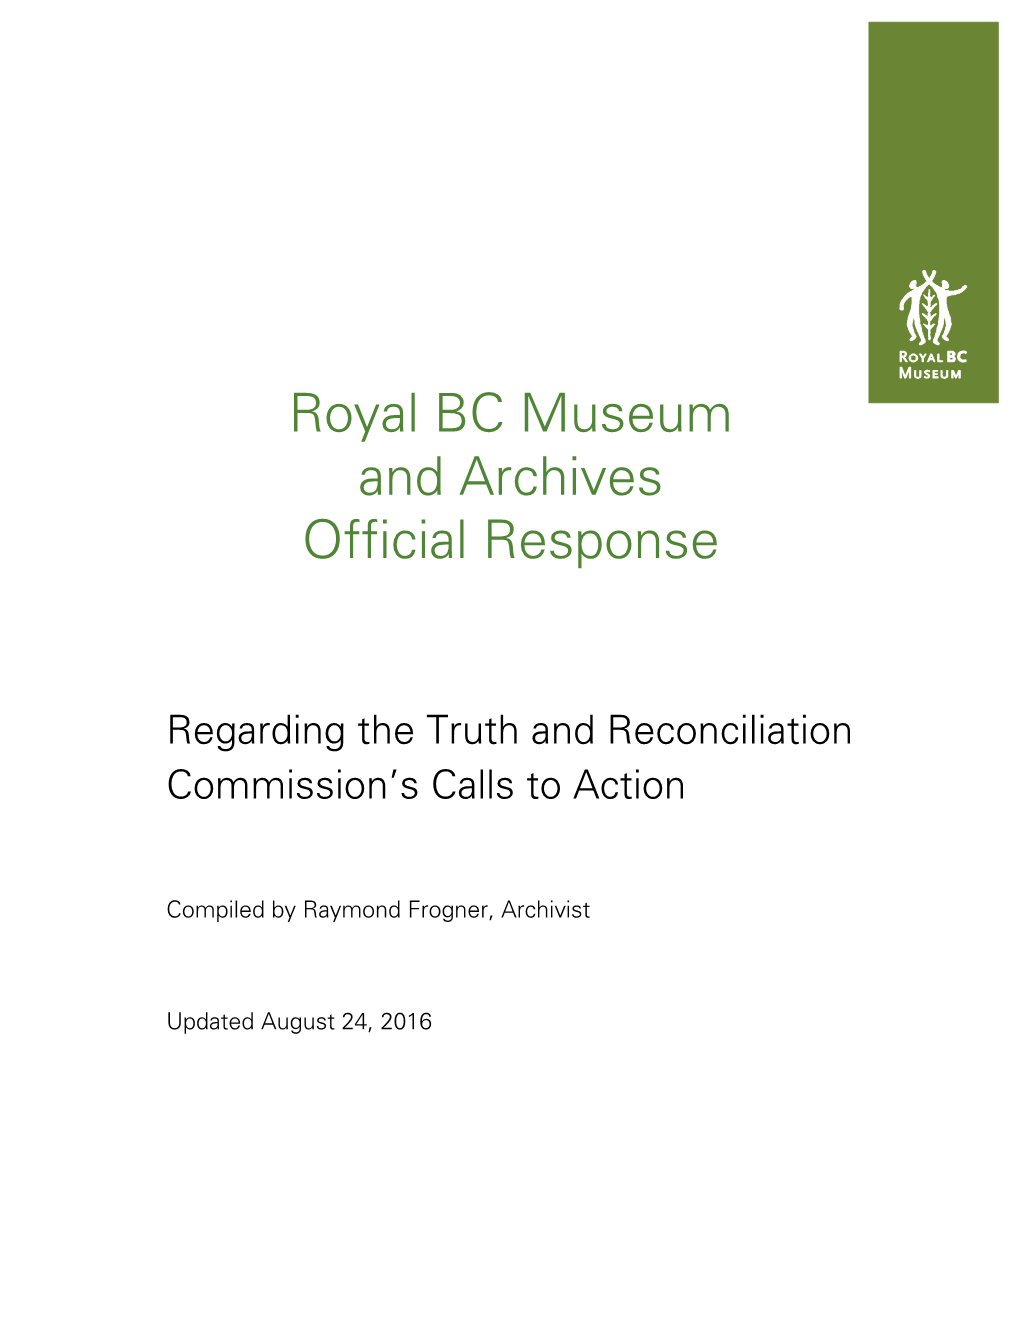 Royal BC Museum and Archives Official Response